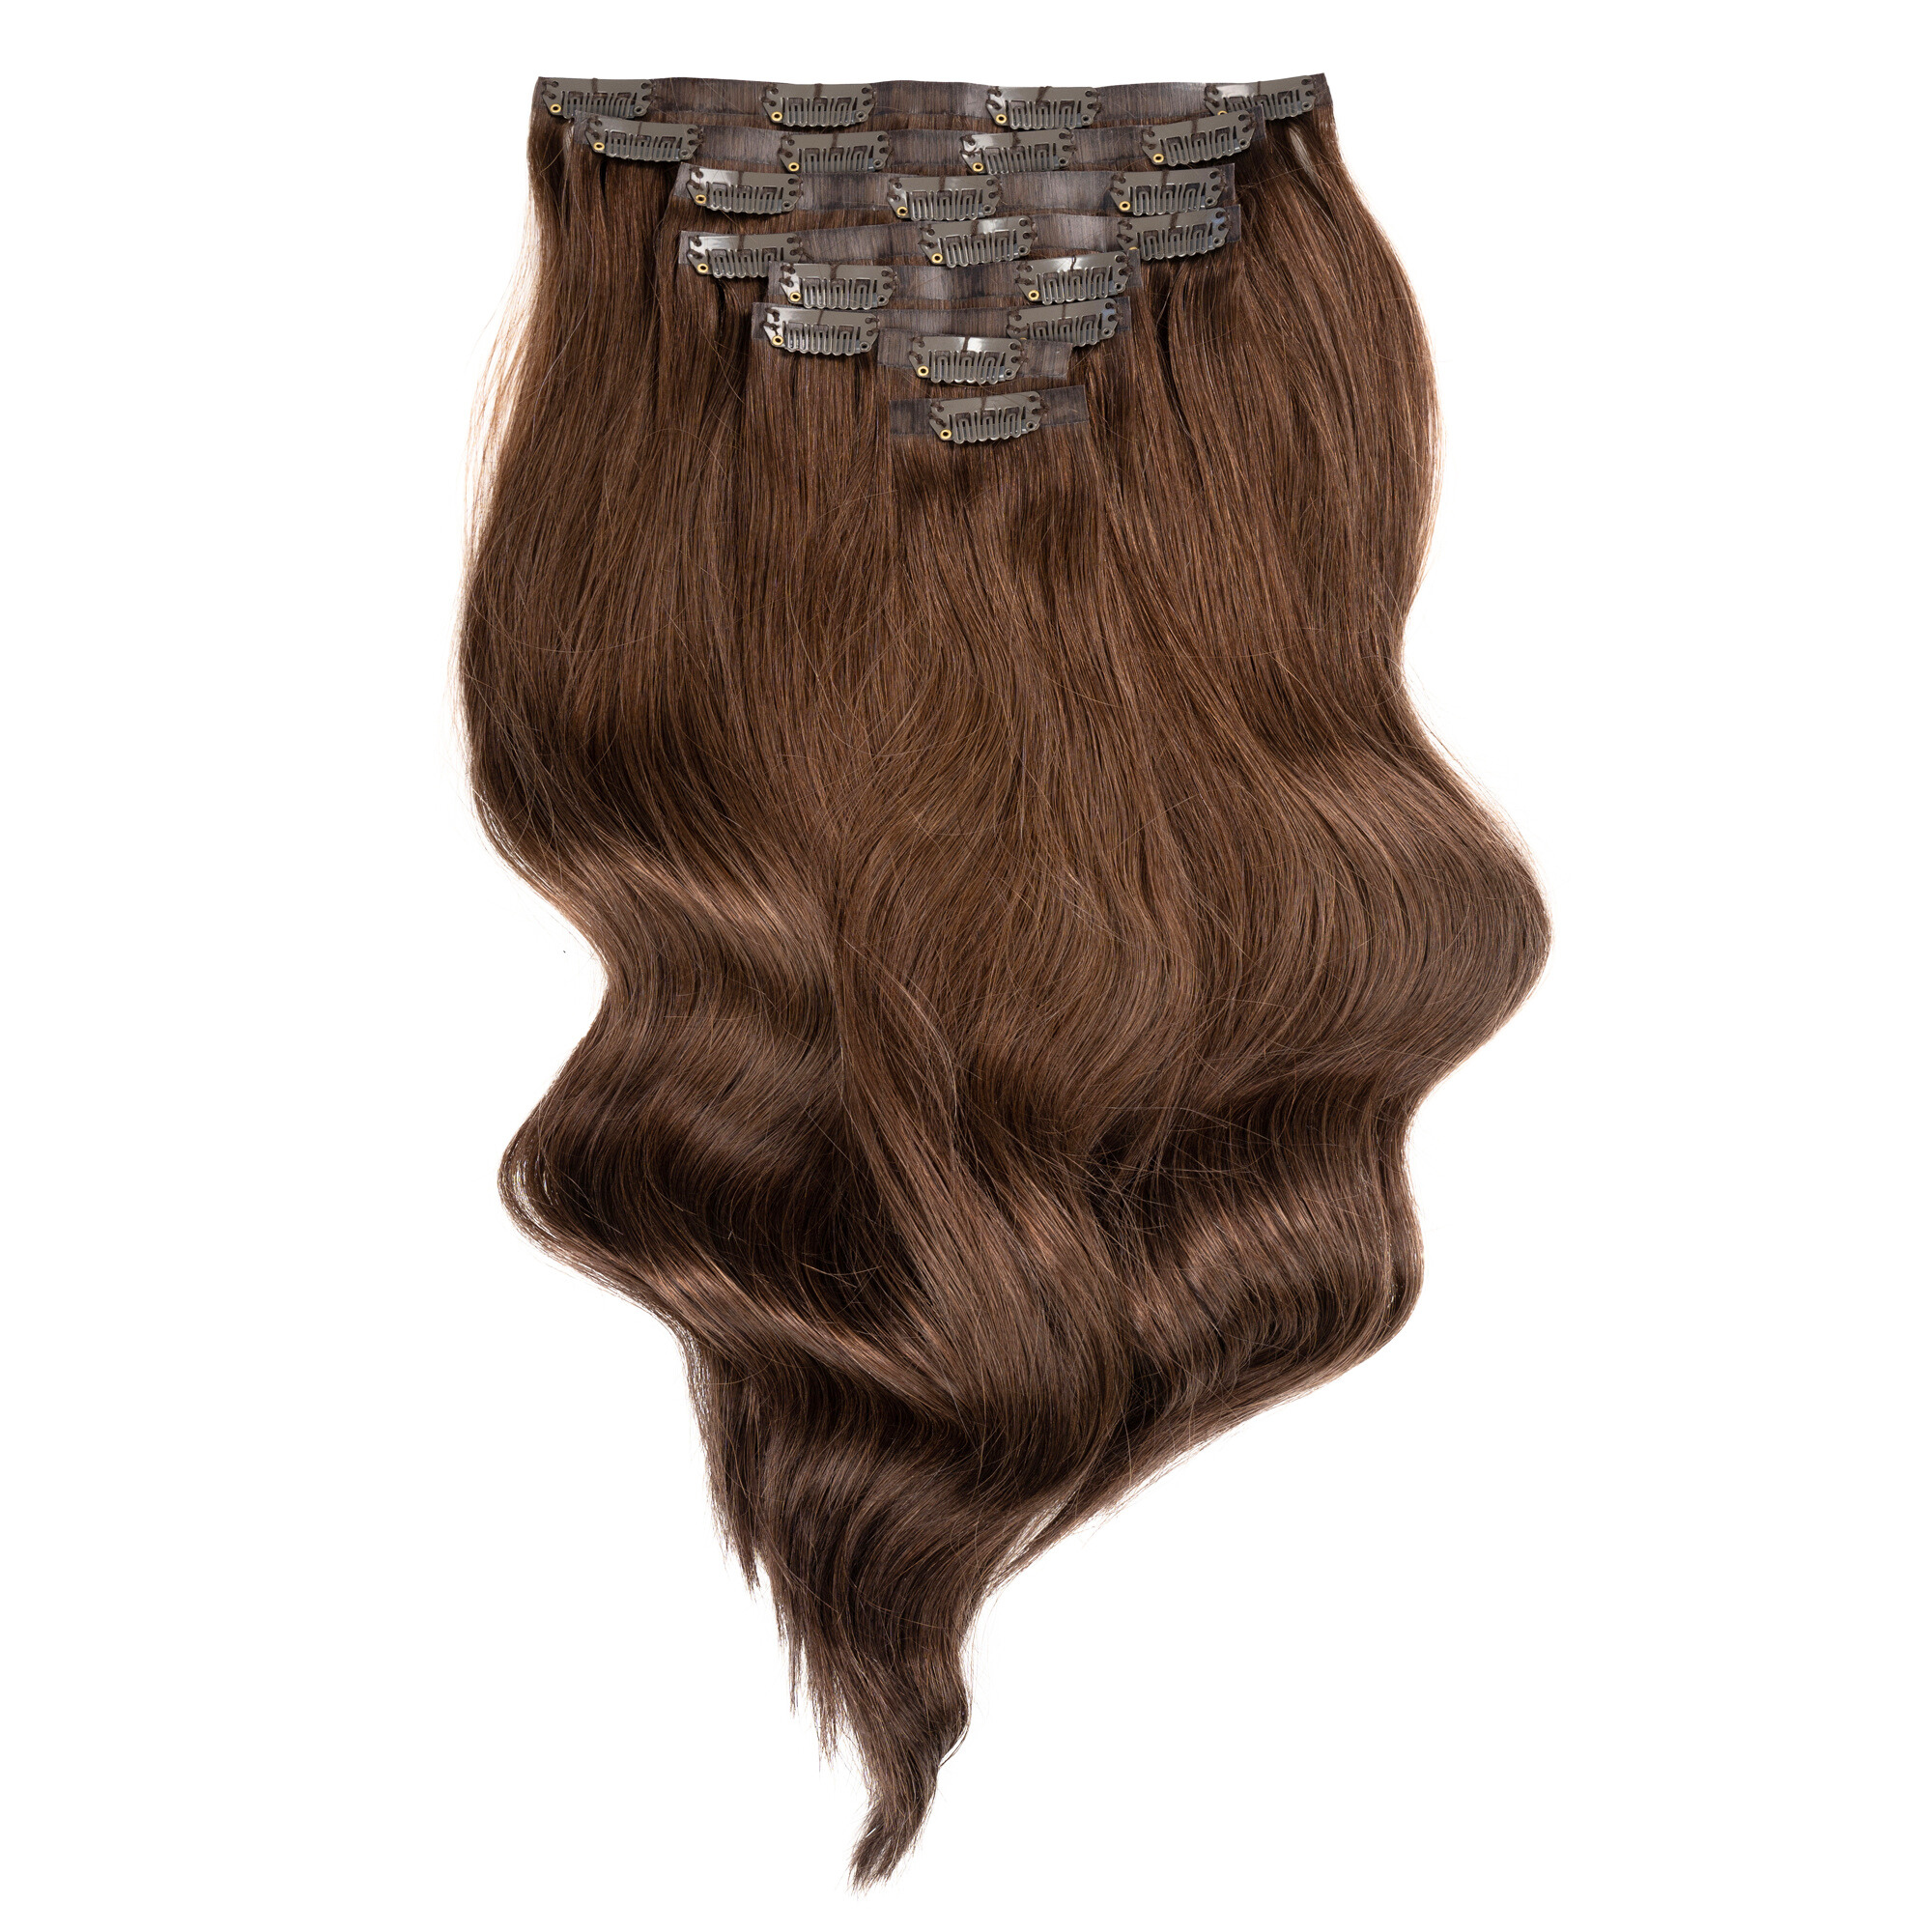 Empress Deluxe Clip-in Hair Extensions 18"Colour 6 Warm Brown - Maneology Hair Extensions